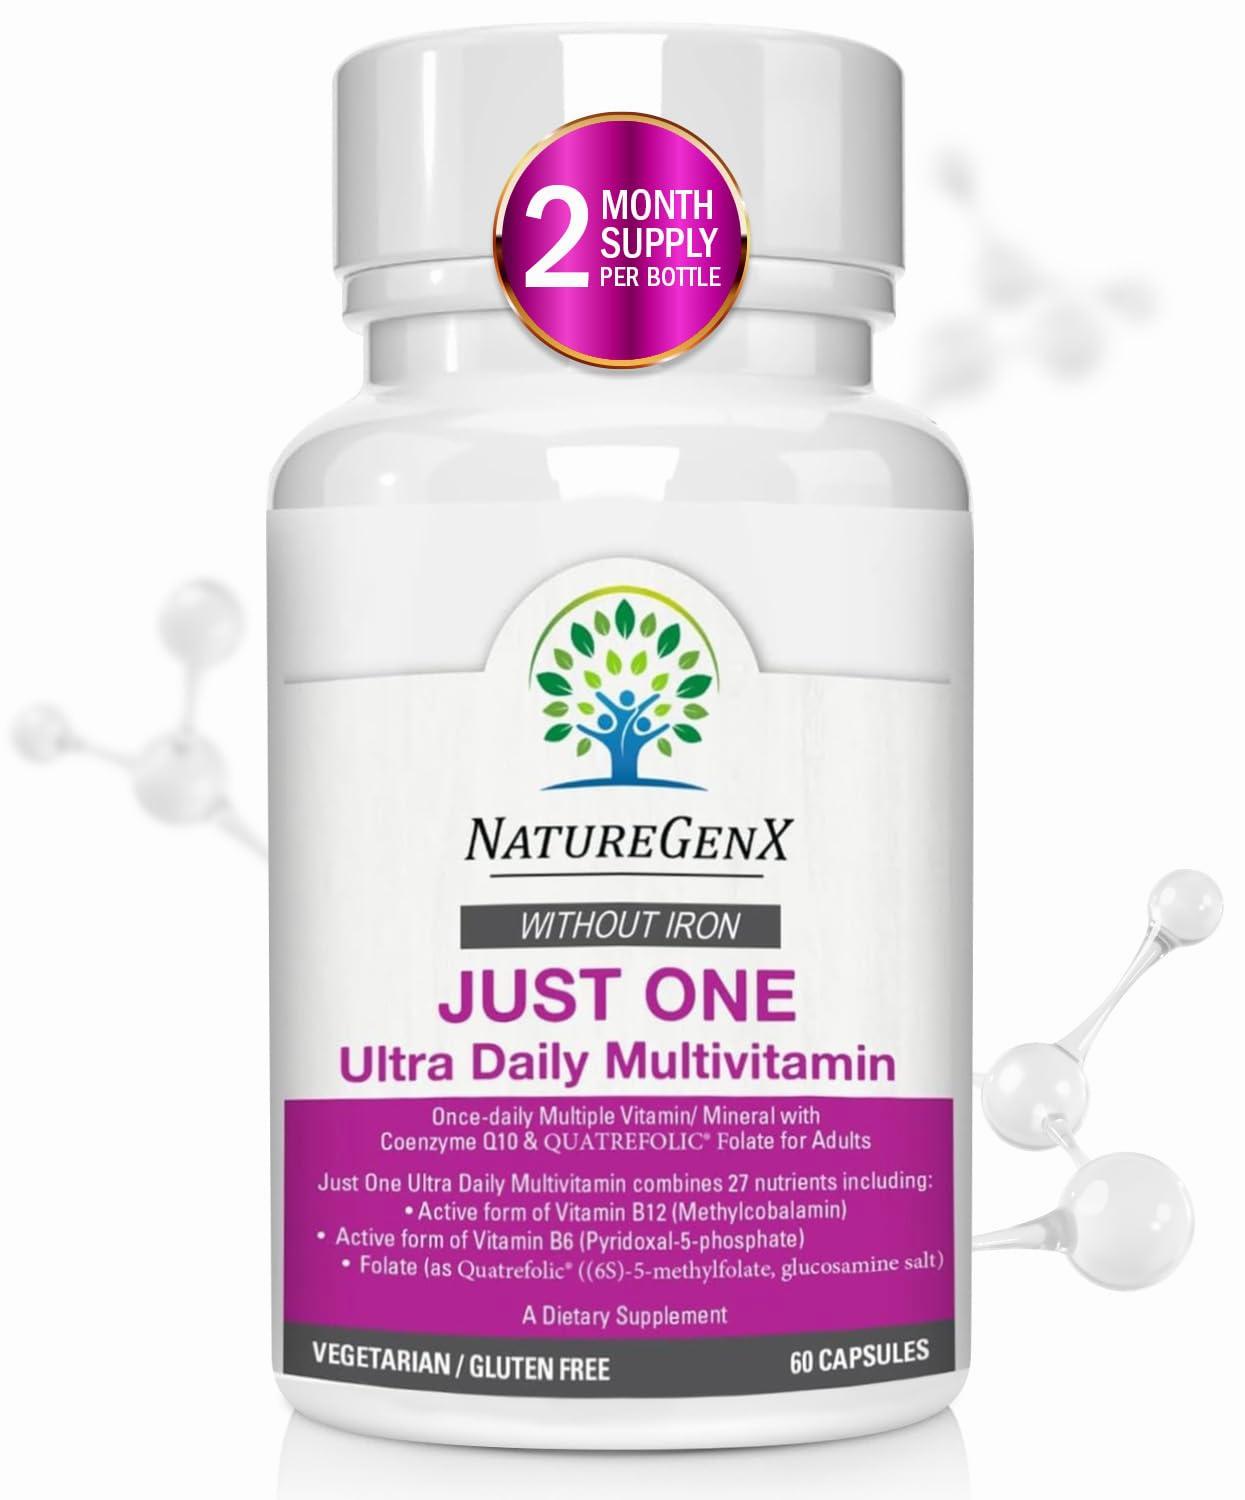 Just One is a once-daily multivitamin and mineral supplement with CoQ10 and Quatrefolic folate.